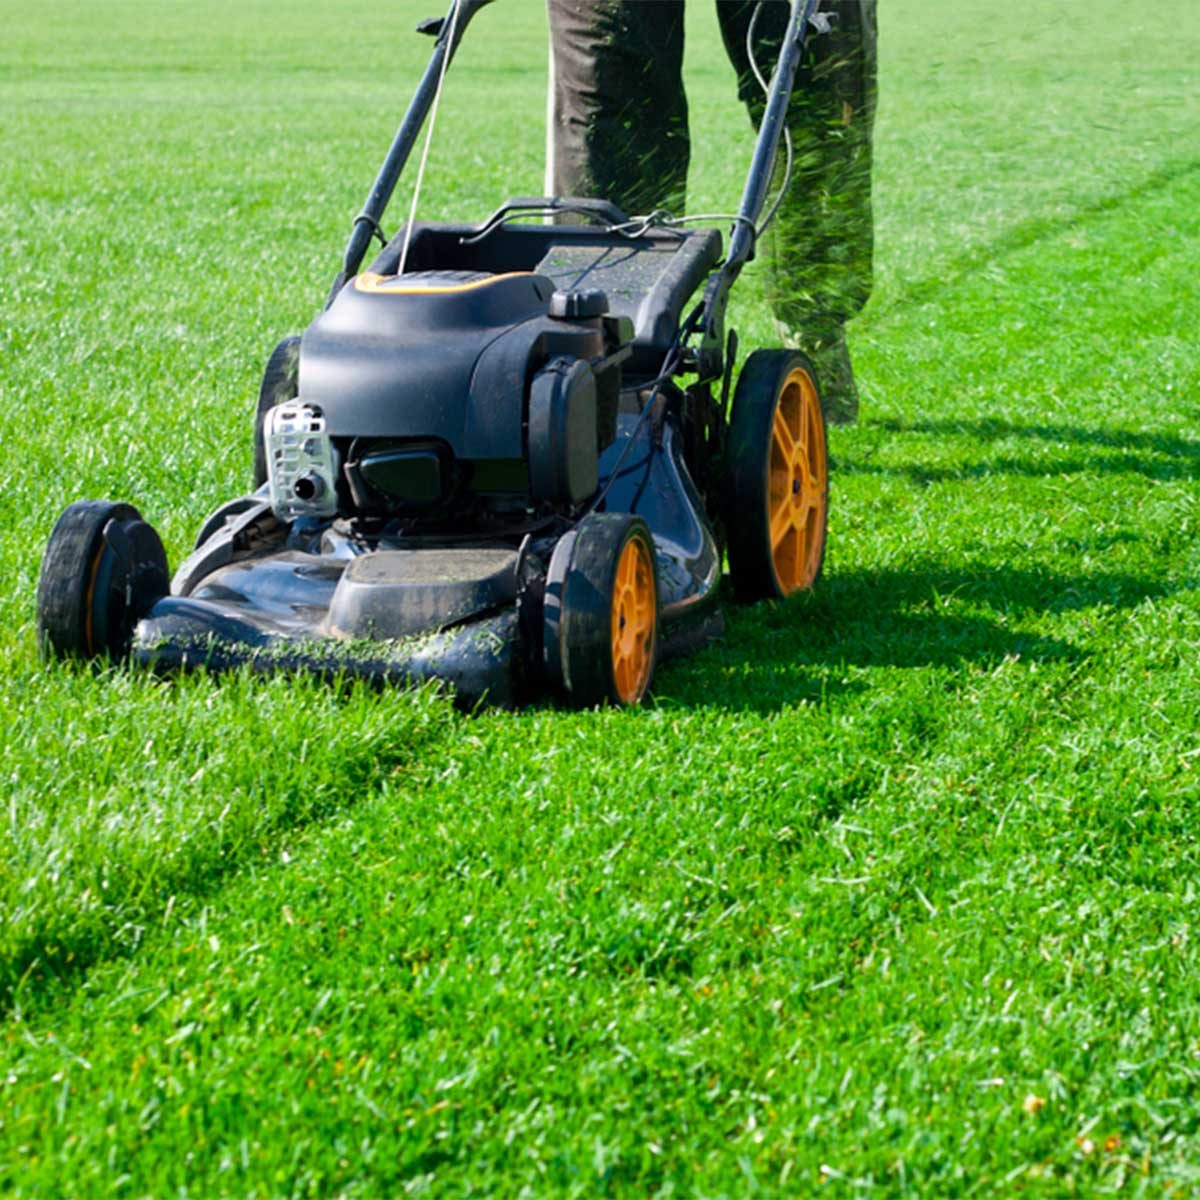 A man is performing lawn maintenance with a mower.